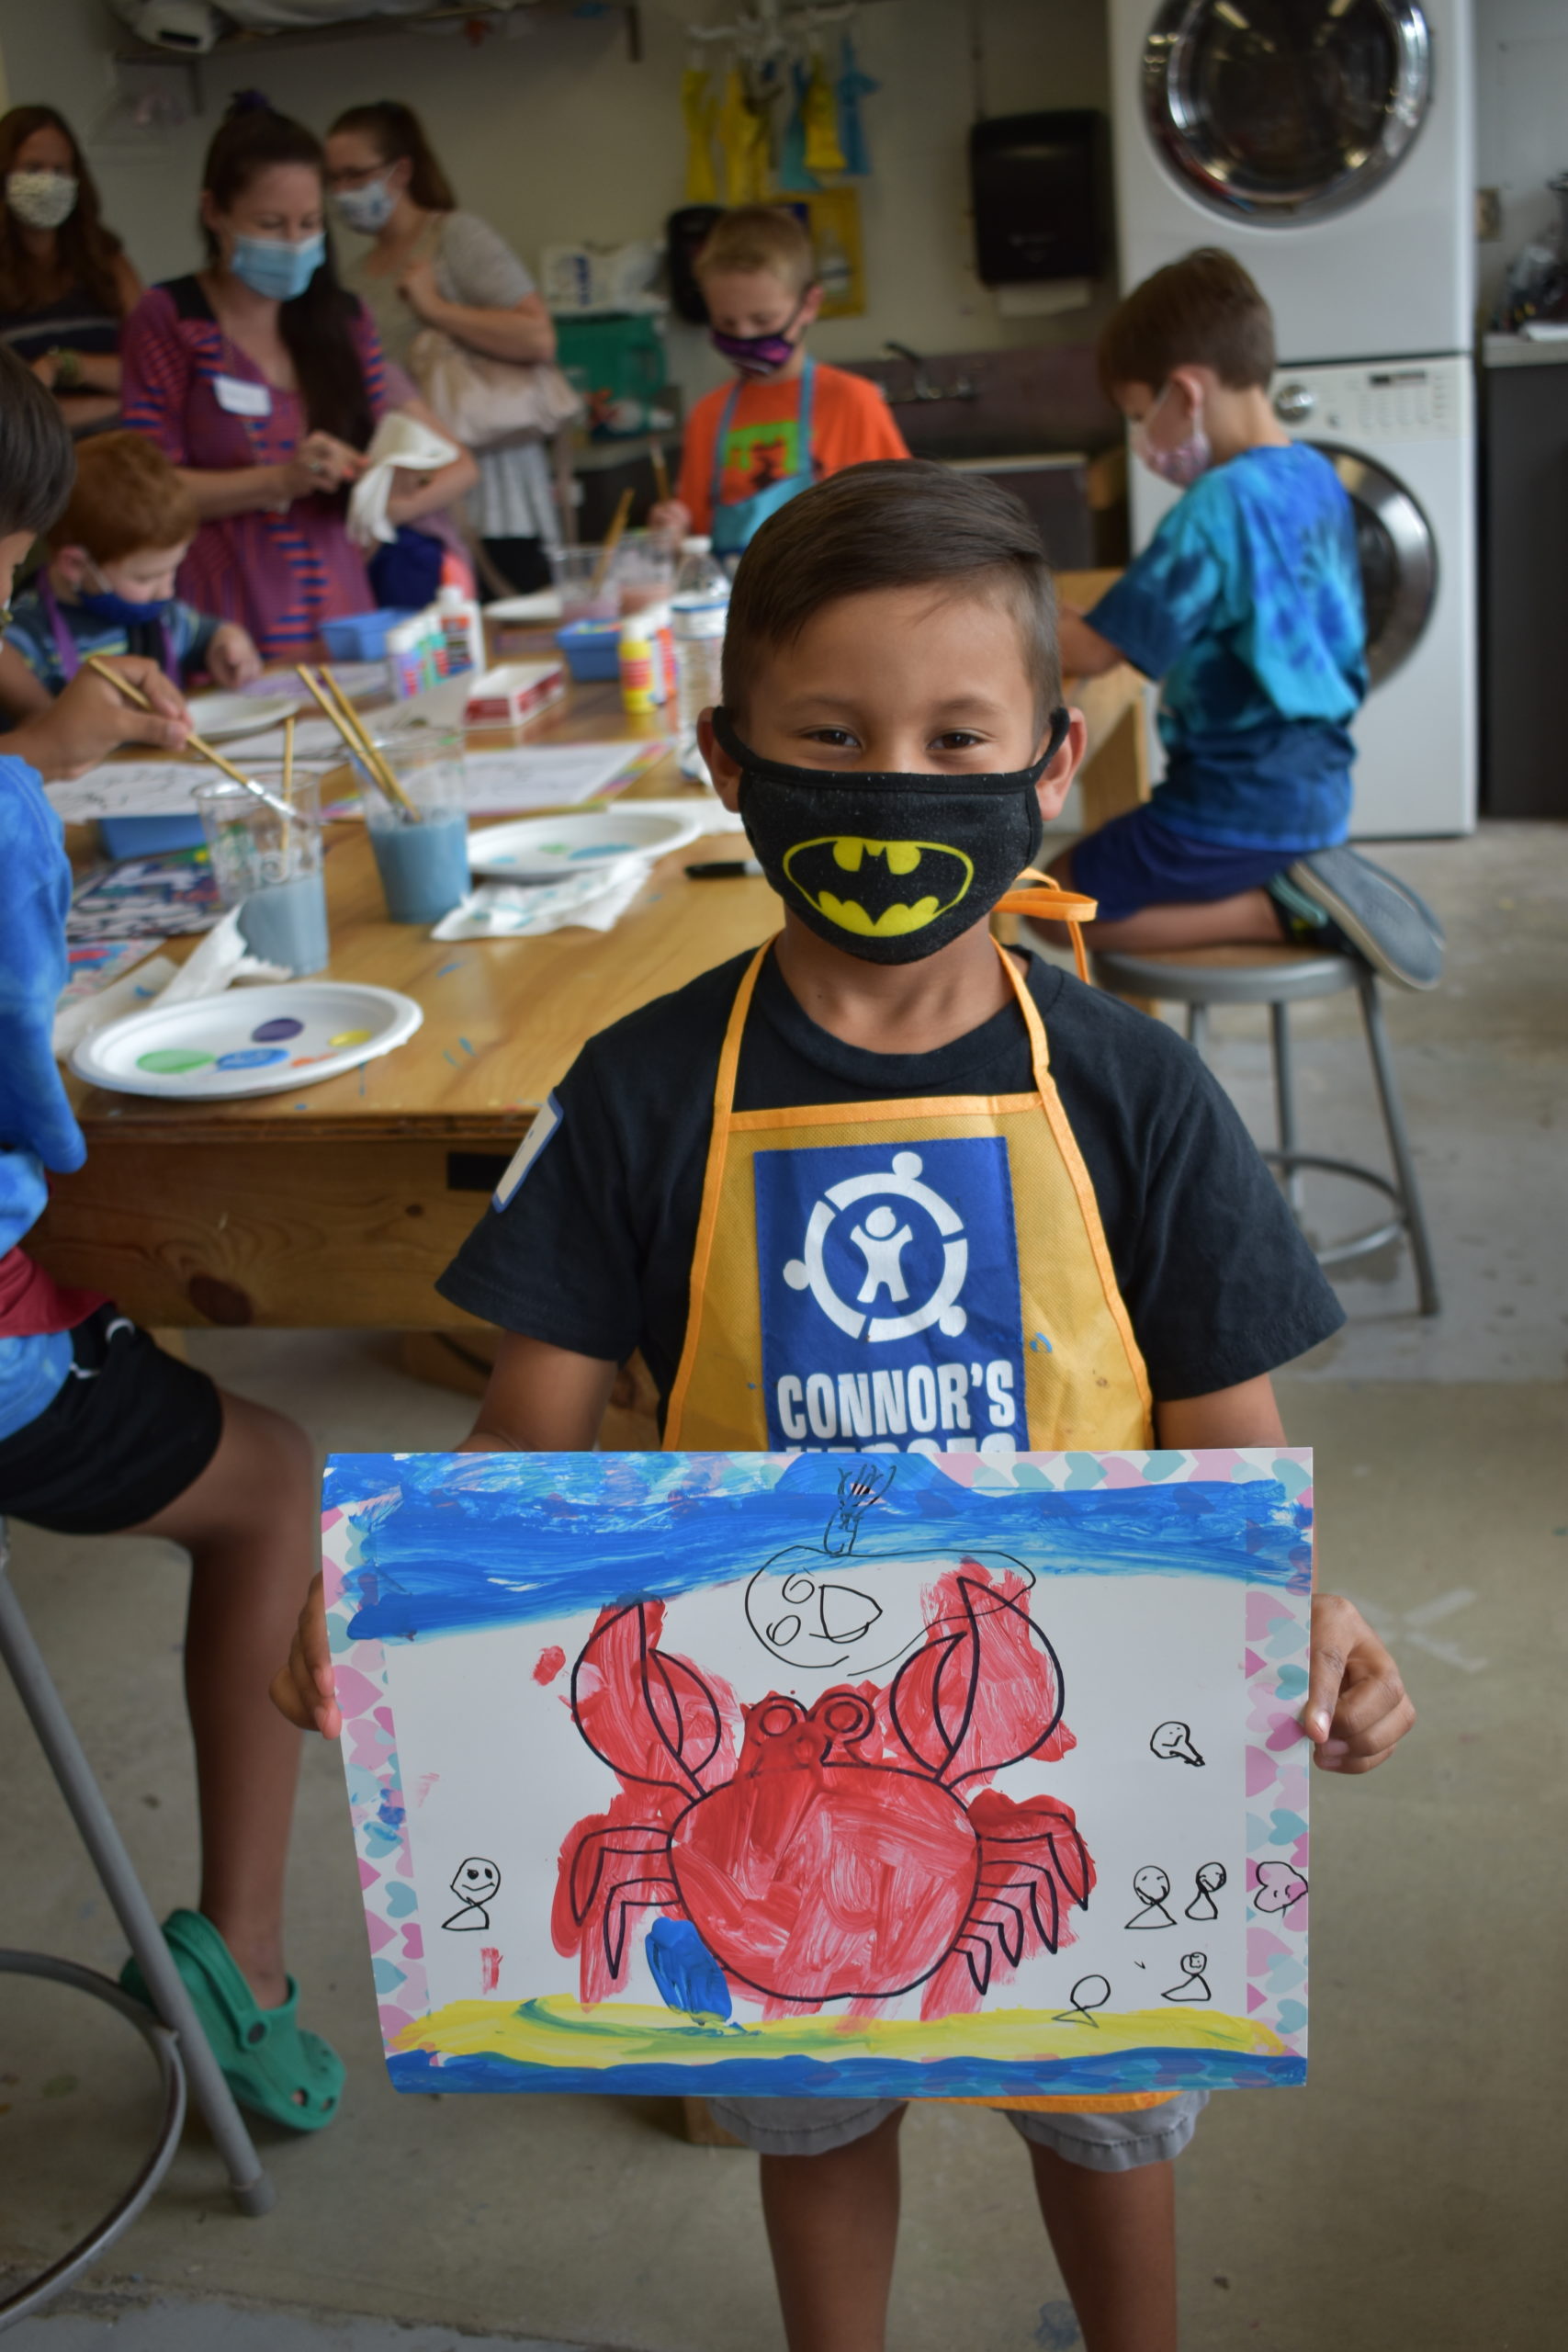 A child wearing a mask holding up a painting of a crab